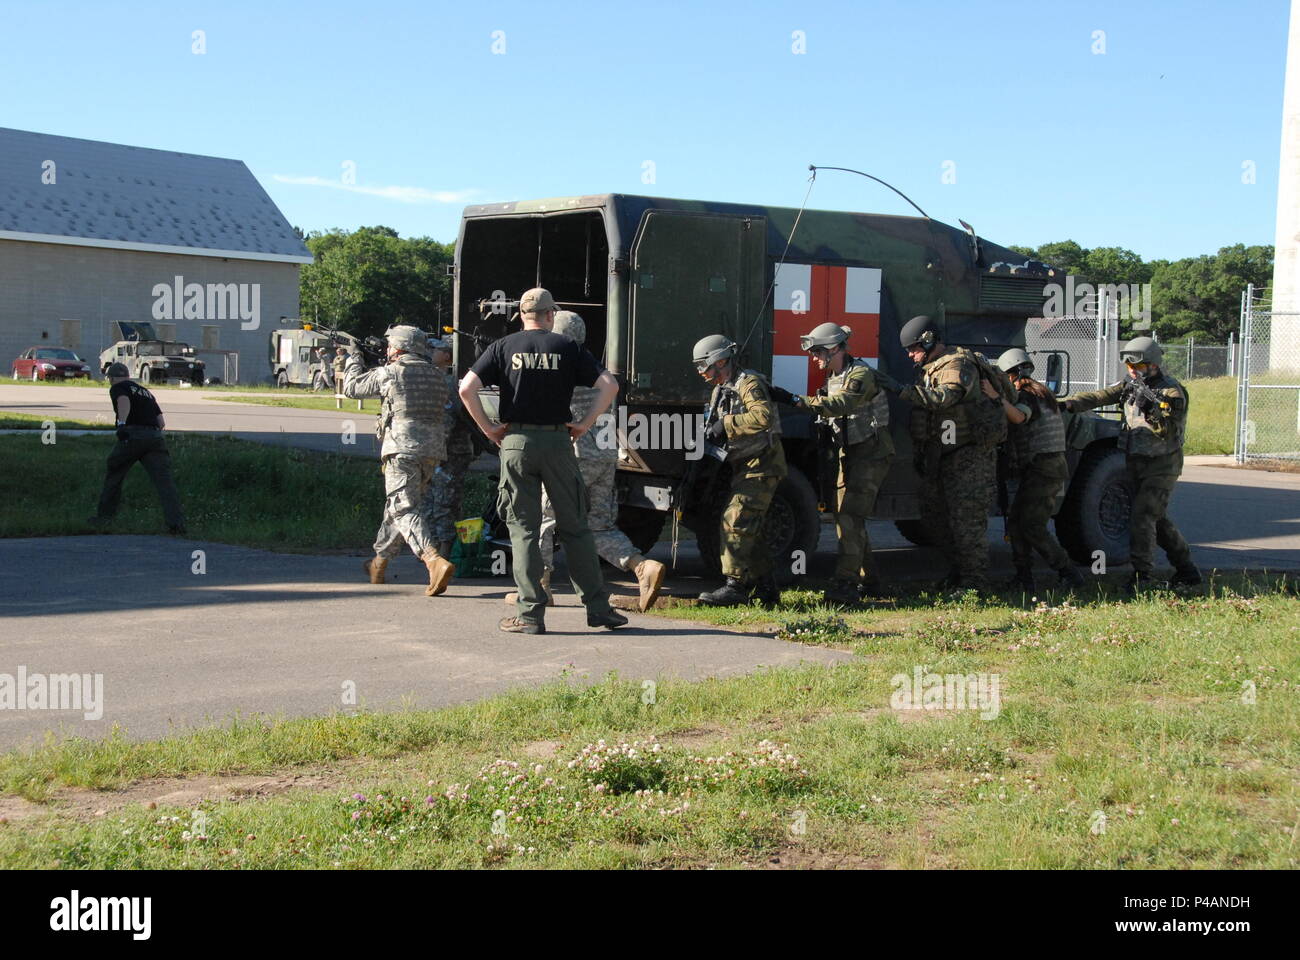 During a culminating event, Soldiers of the Minnesota National Guard and the Norwegian Home Guard conduct squad movements under supervision of local Minnesota law enforcement officers after two days of domestic operations training conducted at Camp Ripley June 24-26. Several law enforcement agencies participated in the event including police officers who are a part of SWAT teams from St. Cloud, East Metro and Morrison, Sherburne and Washington Counties. (Minnesota National Guard Photo by Master Sgt. Ashlee J. L. Sherrill) Stock Photo